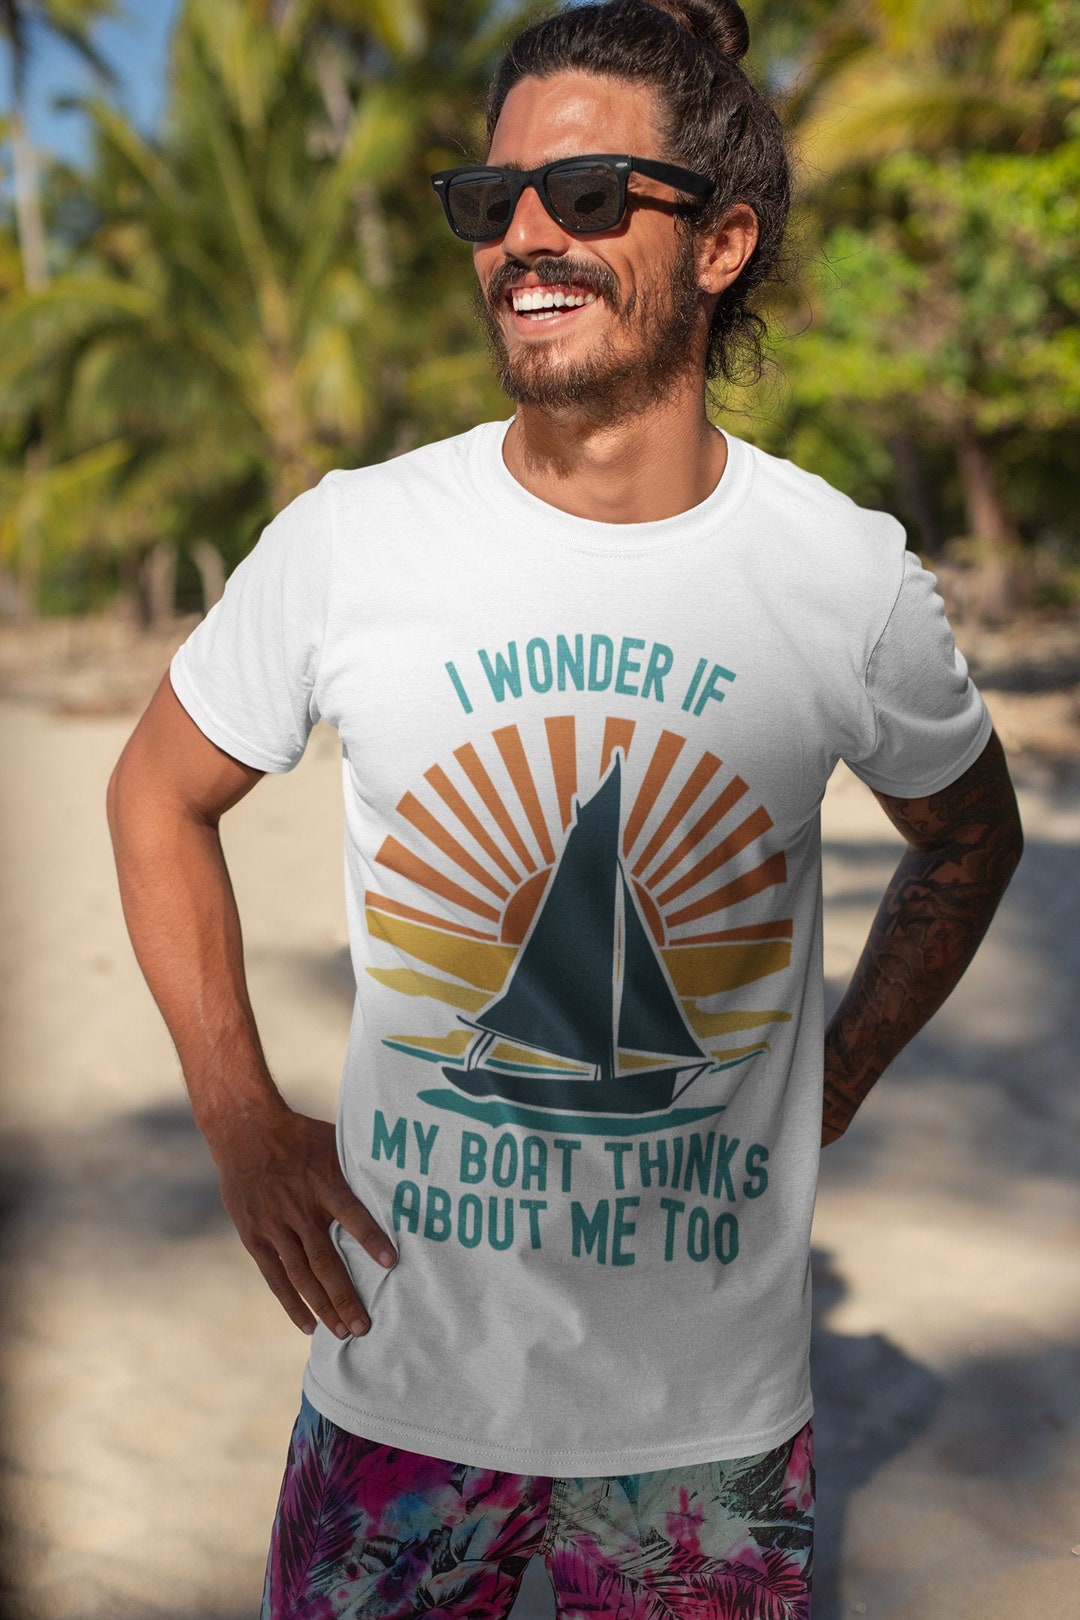 I Wonder If My Boat is Thinking About Me Too T-shirt Funny Boating Shirt  Boating Humor Gifts for Boat Lovers Boat Present 